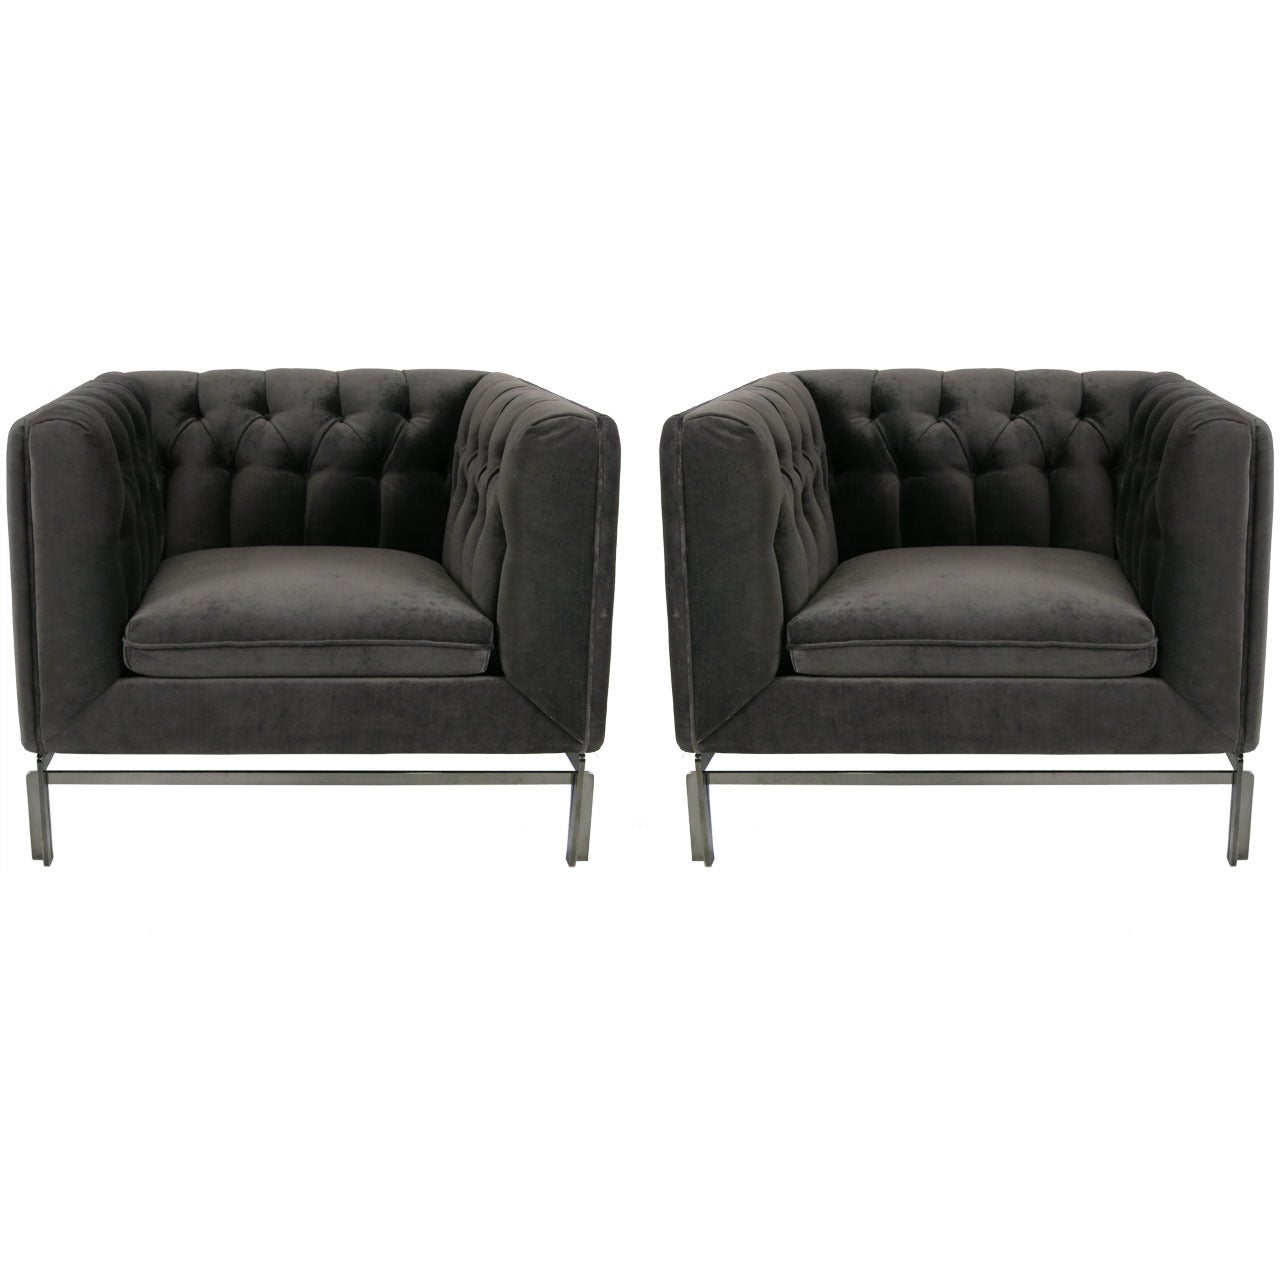 Exceptional Pair of Gunmetal Base Club Chairs by Stow-Davis